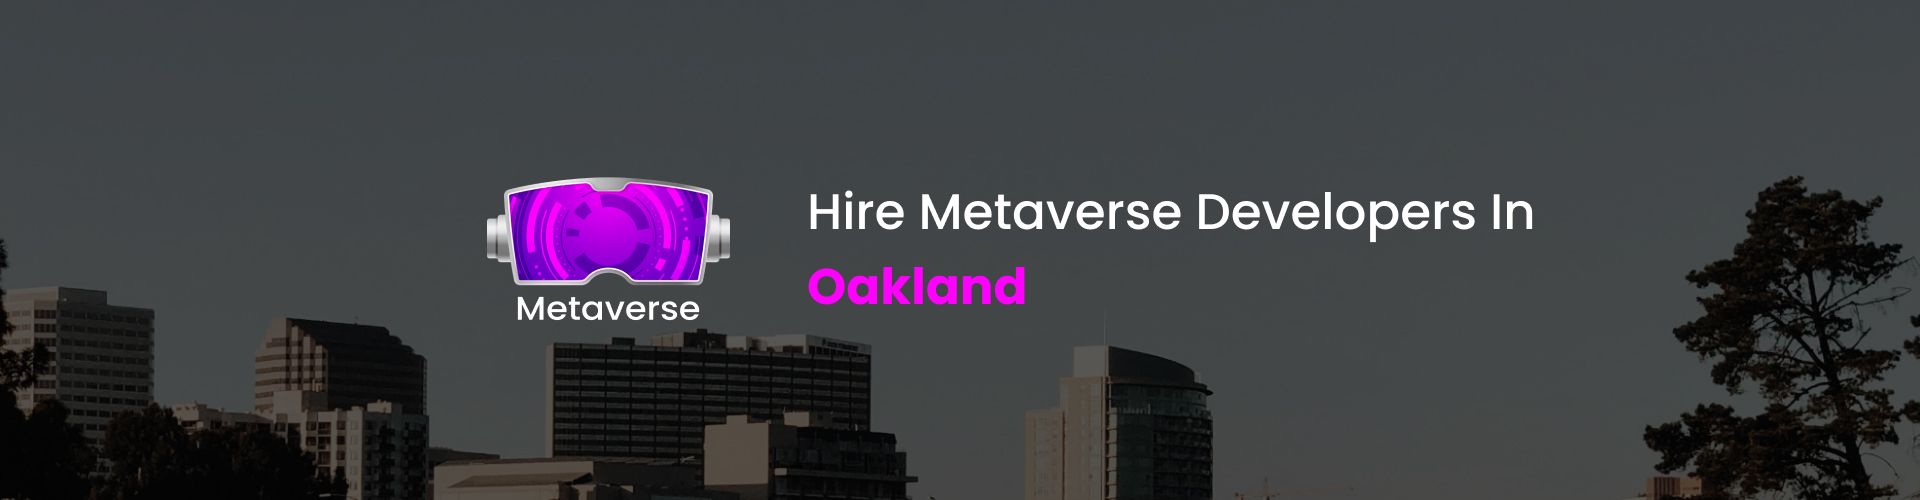 hire metaverse developers in oakland